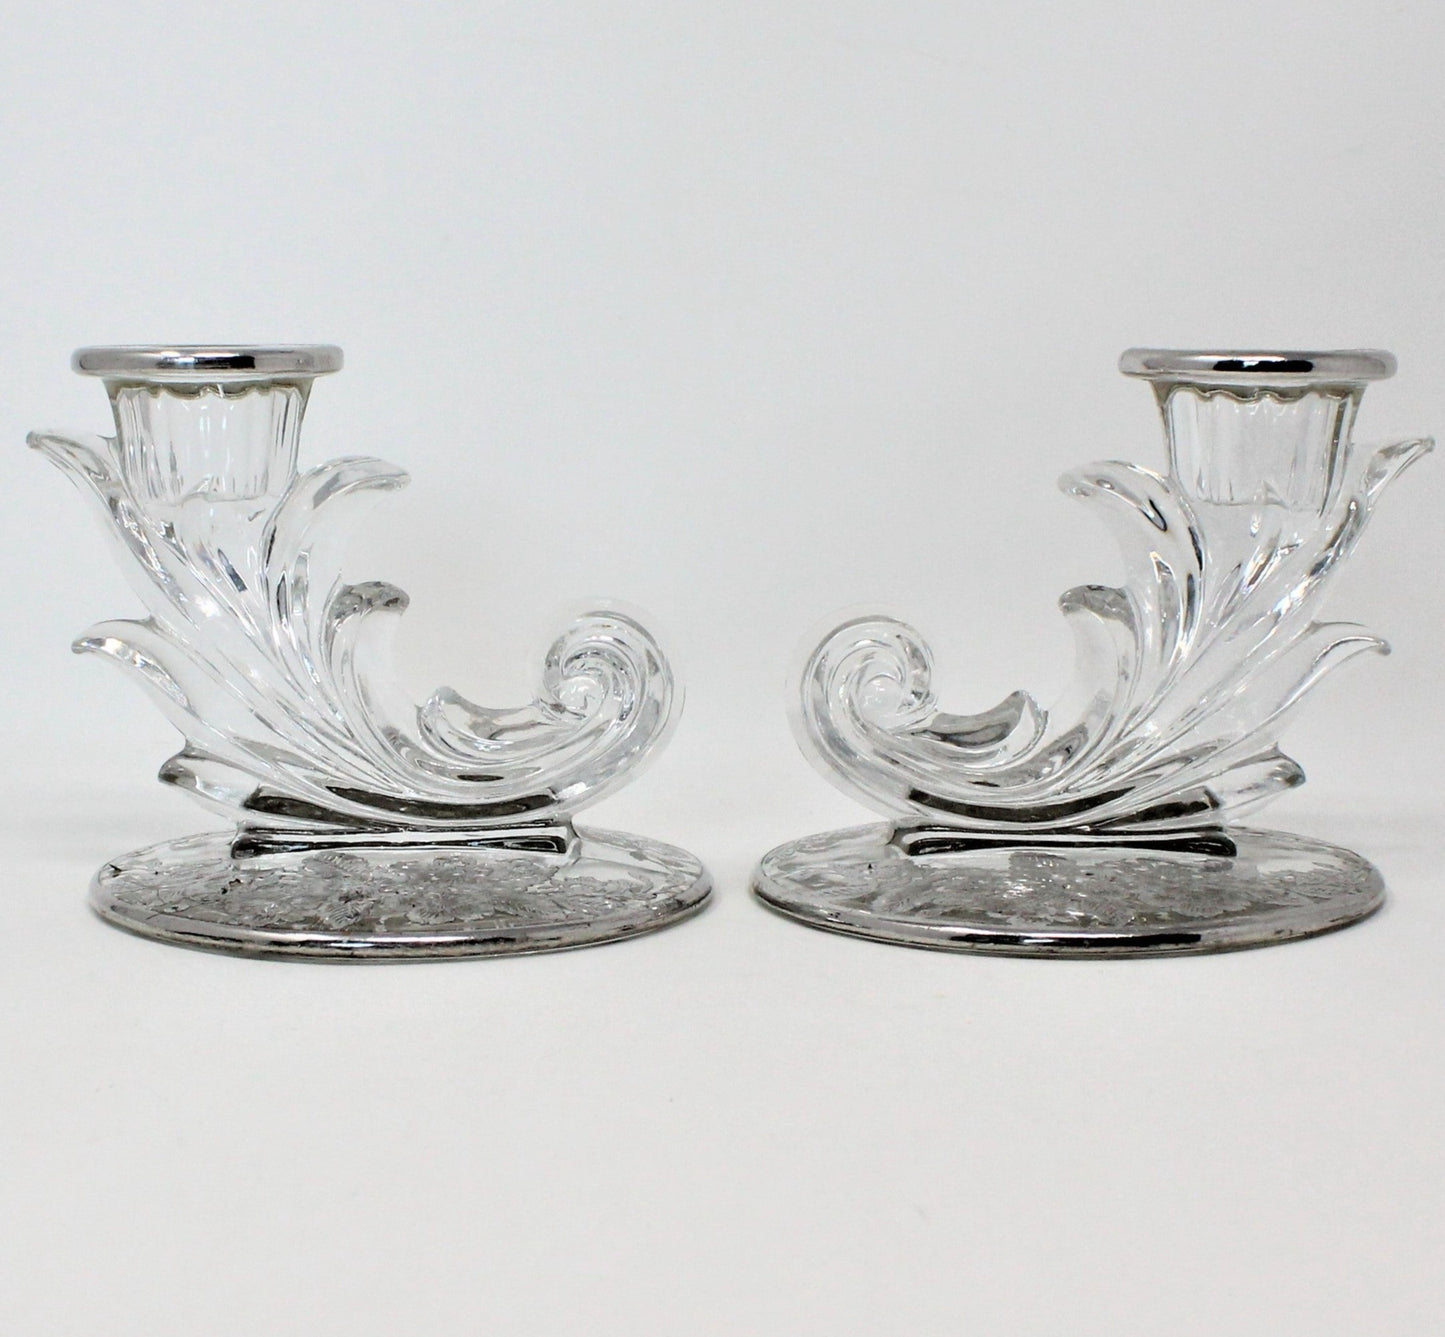 Candle Holders, Silver City / Fostoria, Silver Overlay, Baroque, Set of 2, Vintage